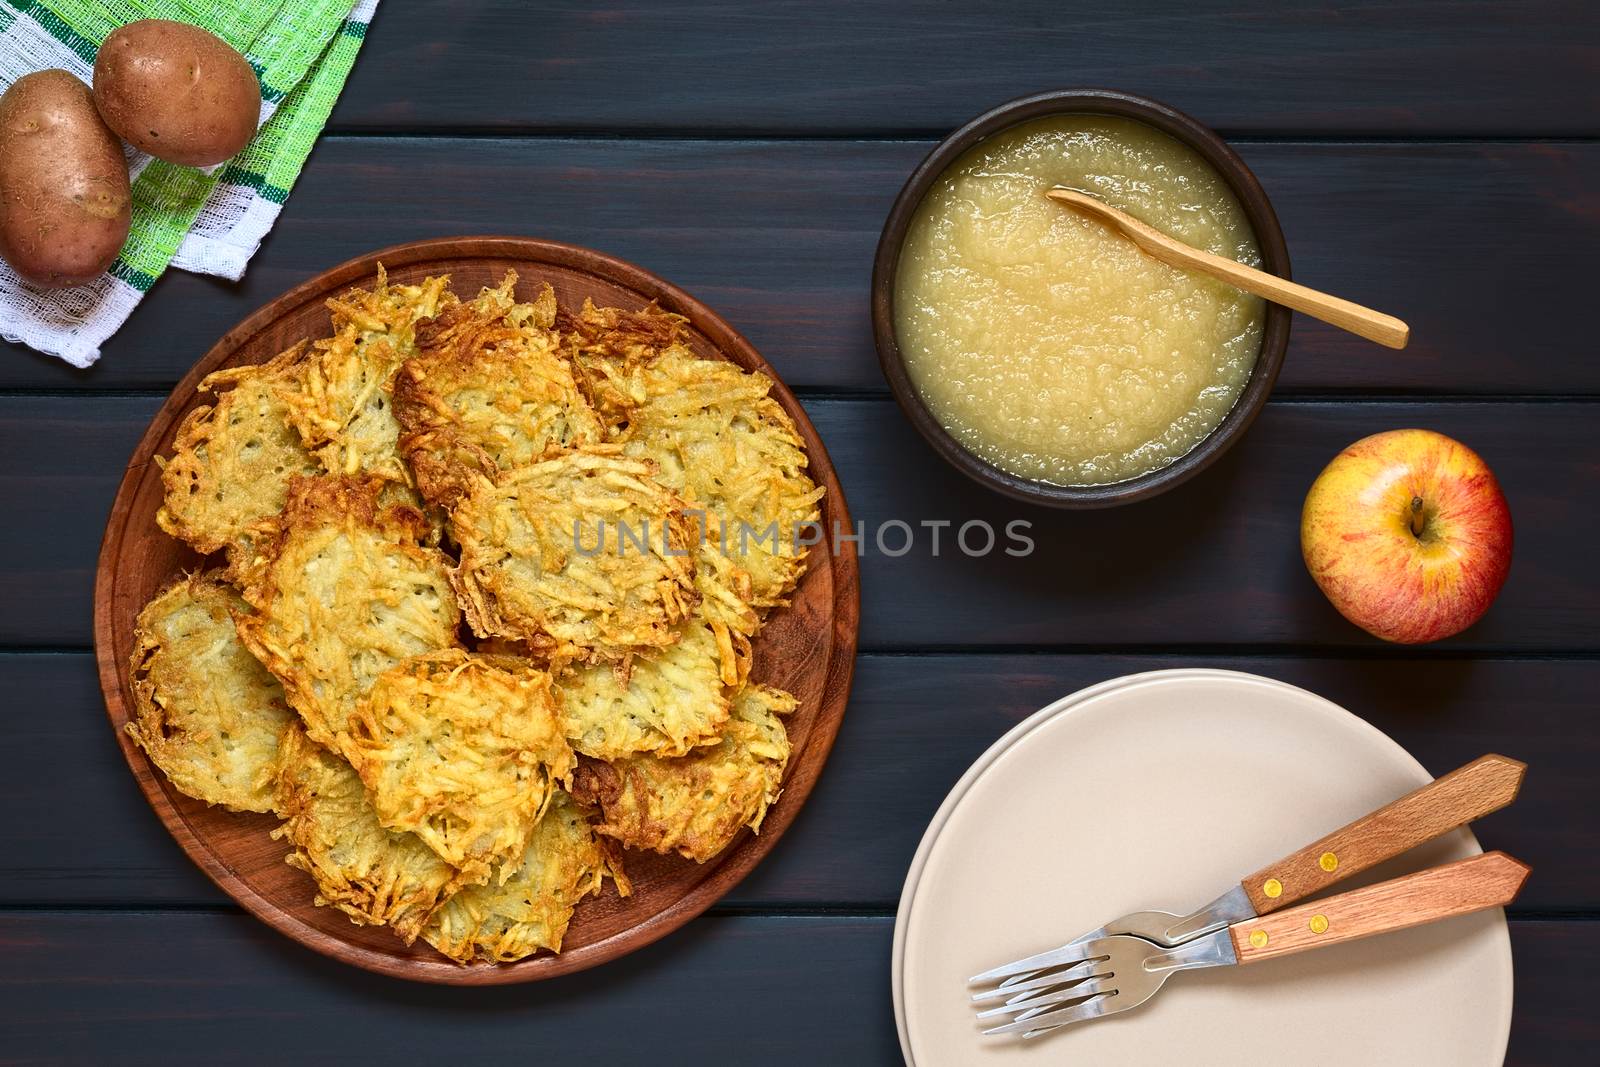 Potato Pancake or Fritter with Apple Sauce by ildi